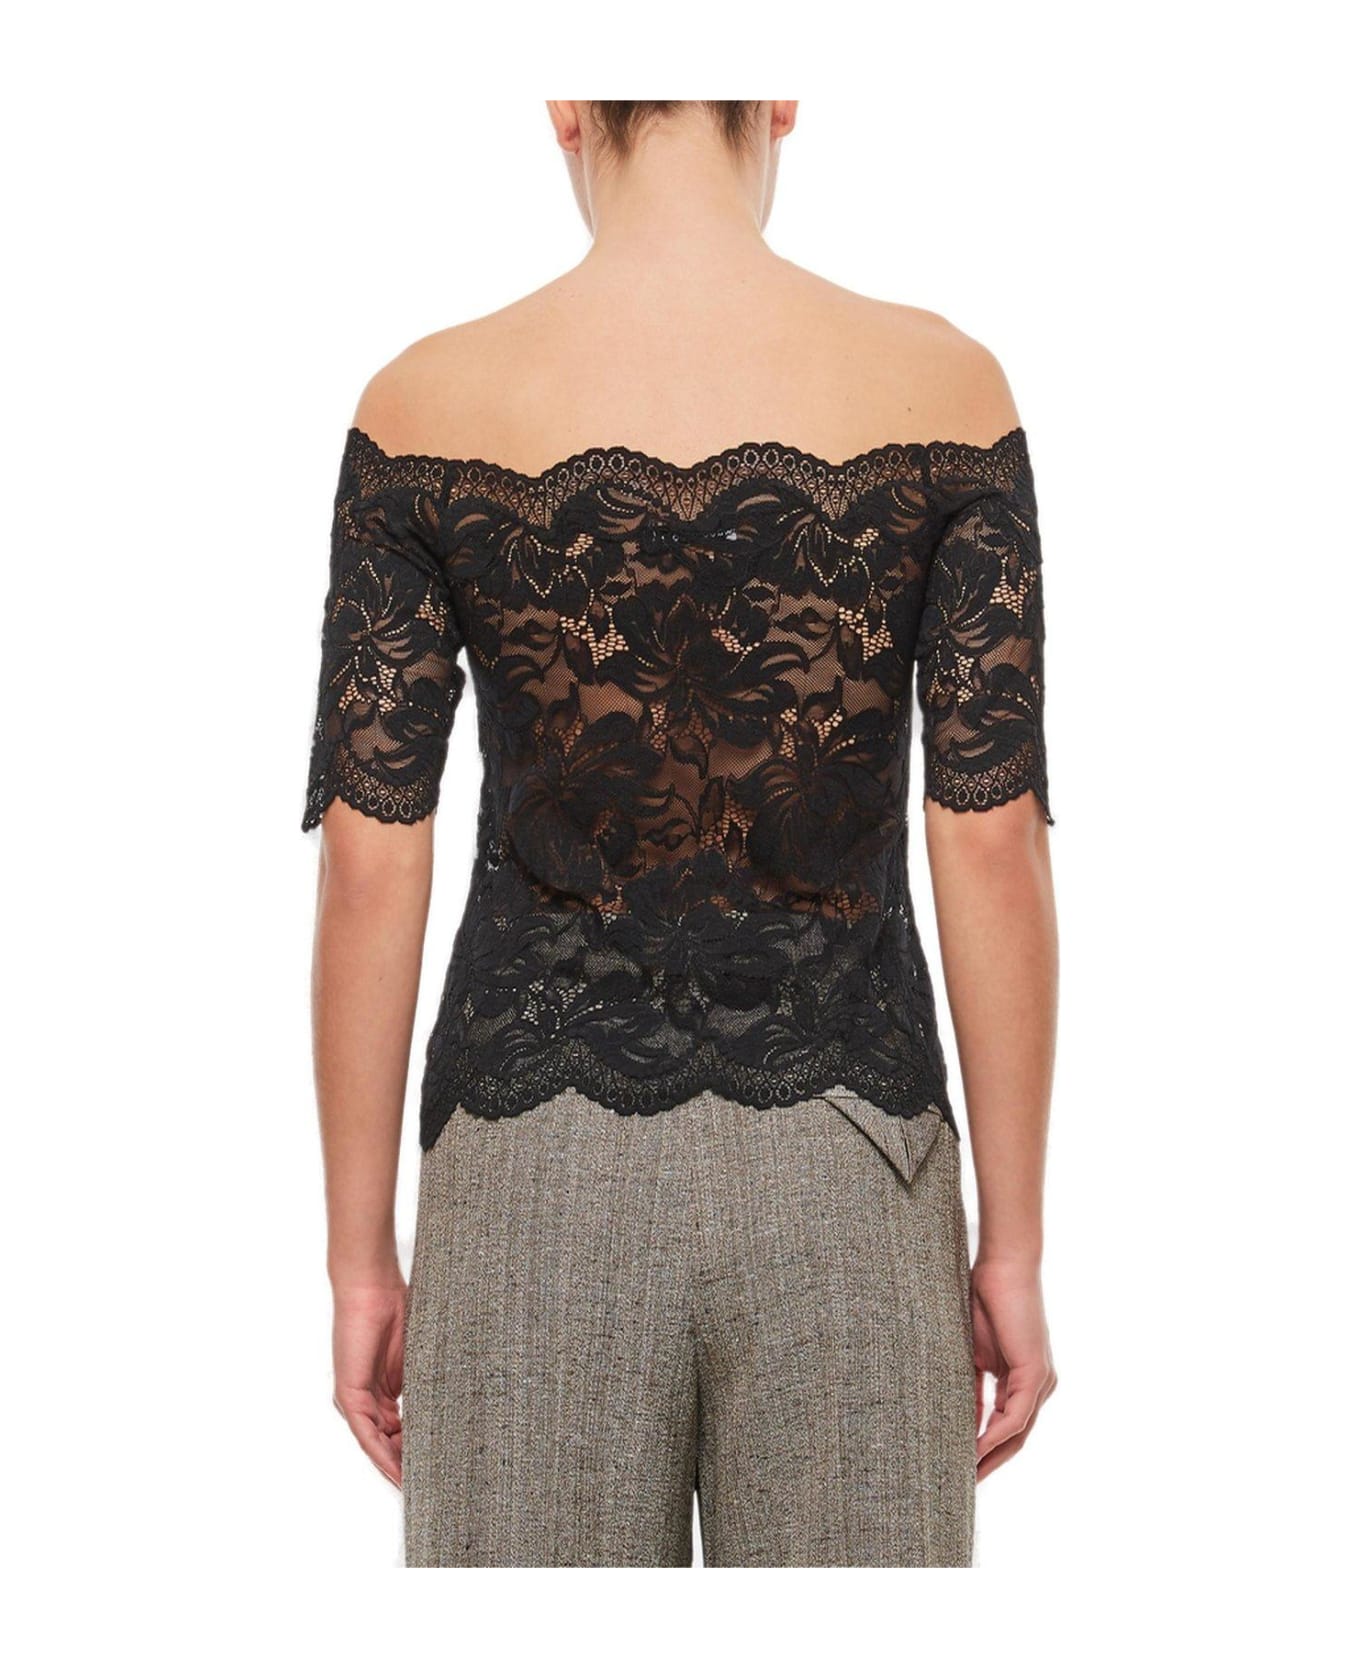 Paco Rabanne Slim Fit Lace Blouse - Black ブラウス